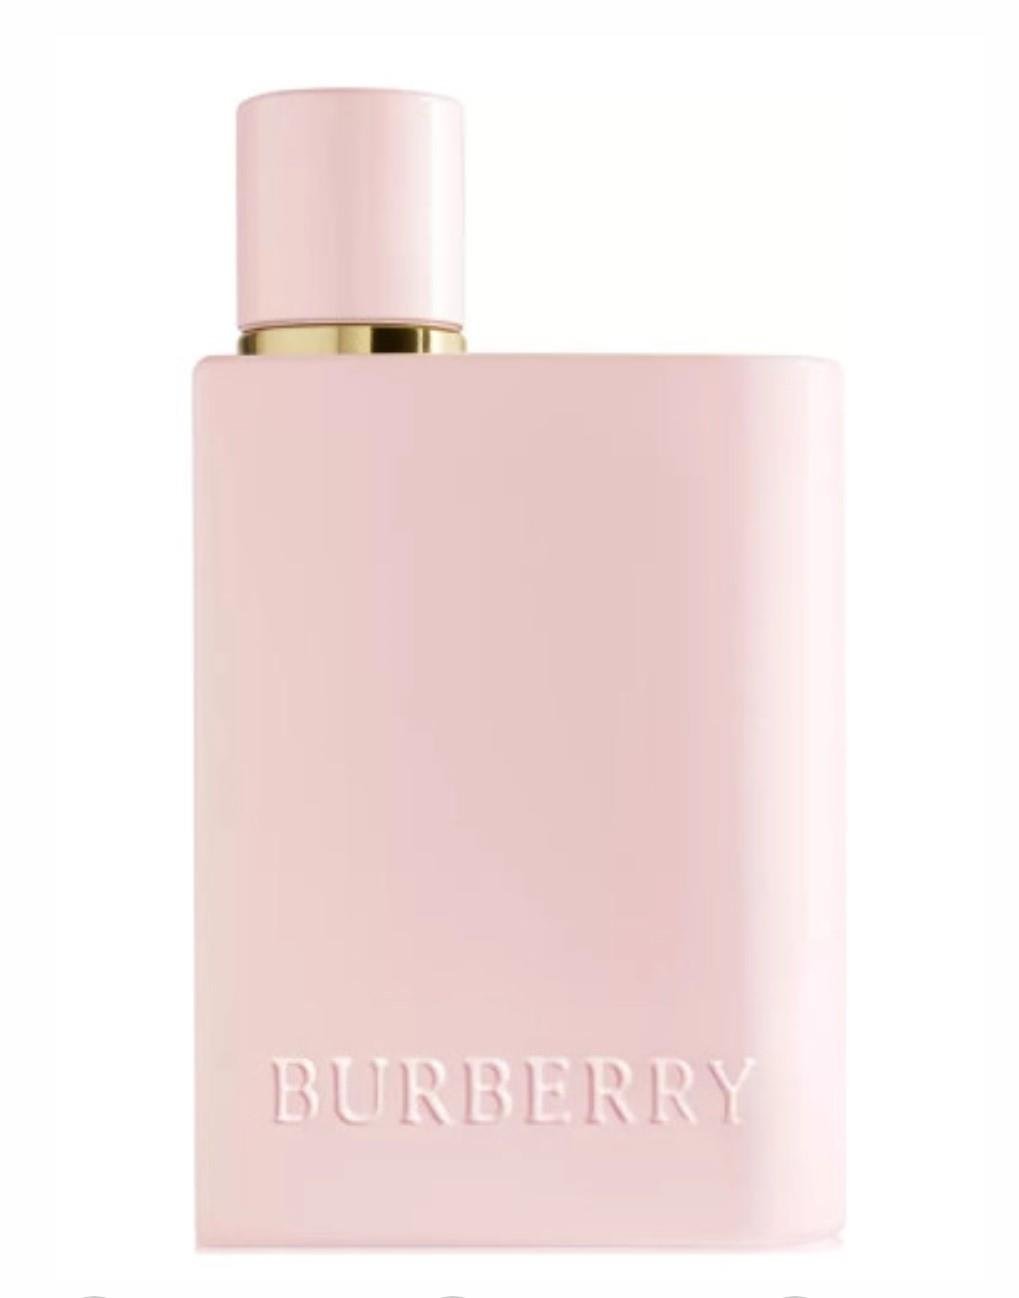 Samples EdP Buy and Her Burberry Court - The Perfume Fragrances Elixir Decanted - Perfumed